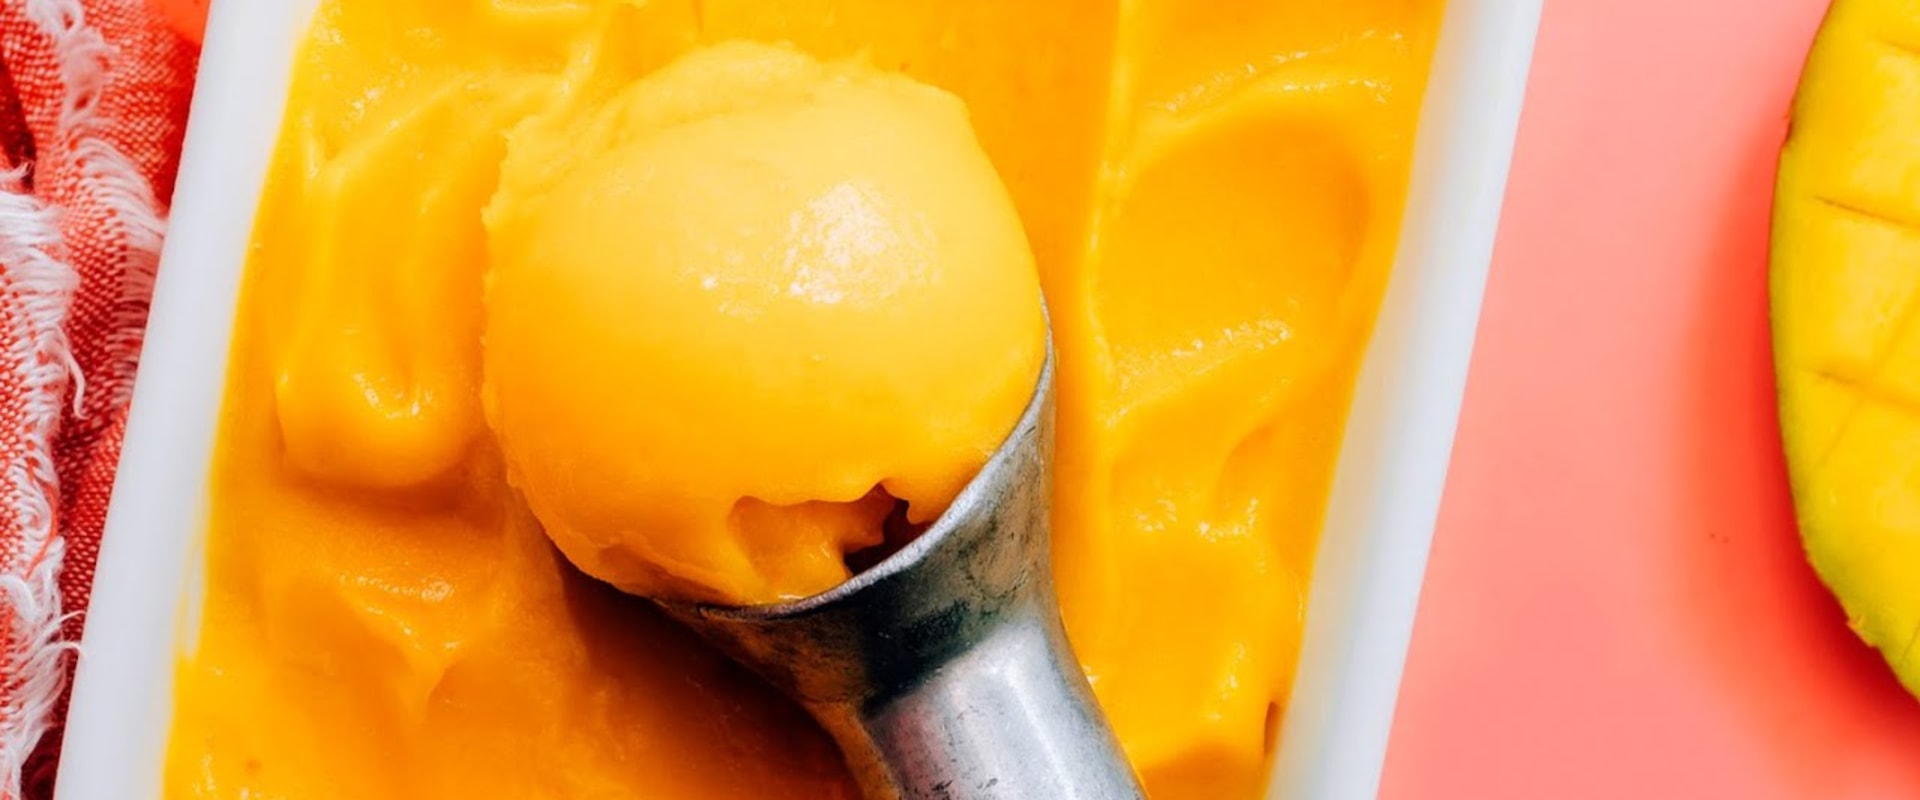 Can I Make a Delicious and Healthy Sorbet from a Whole Wholesale Raw Mango?